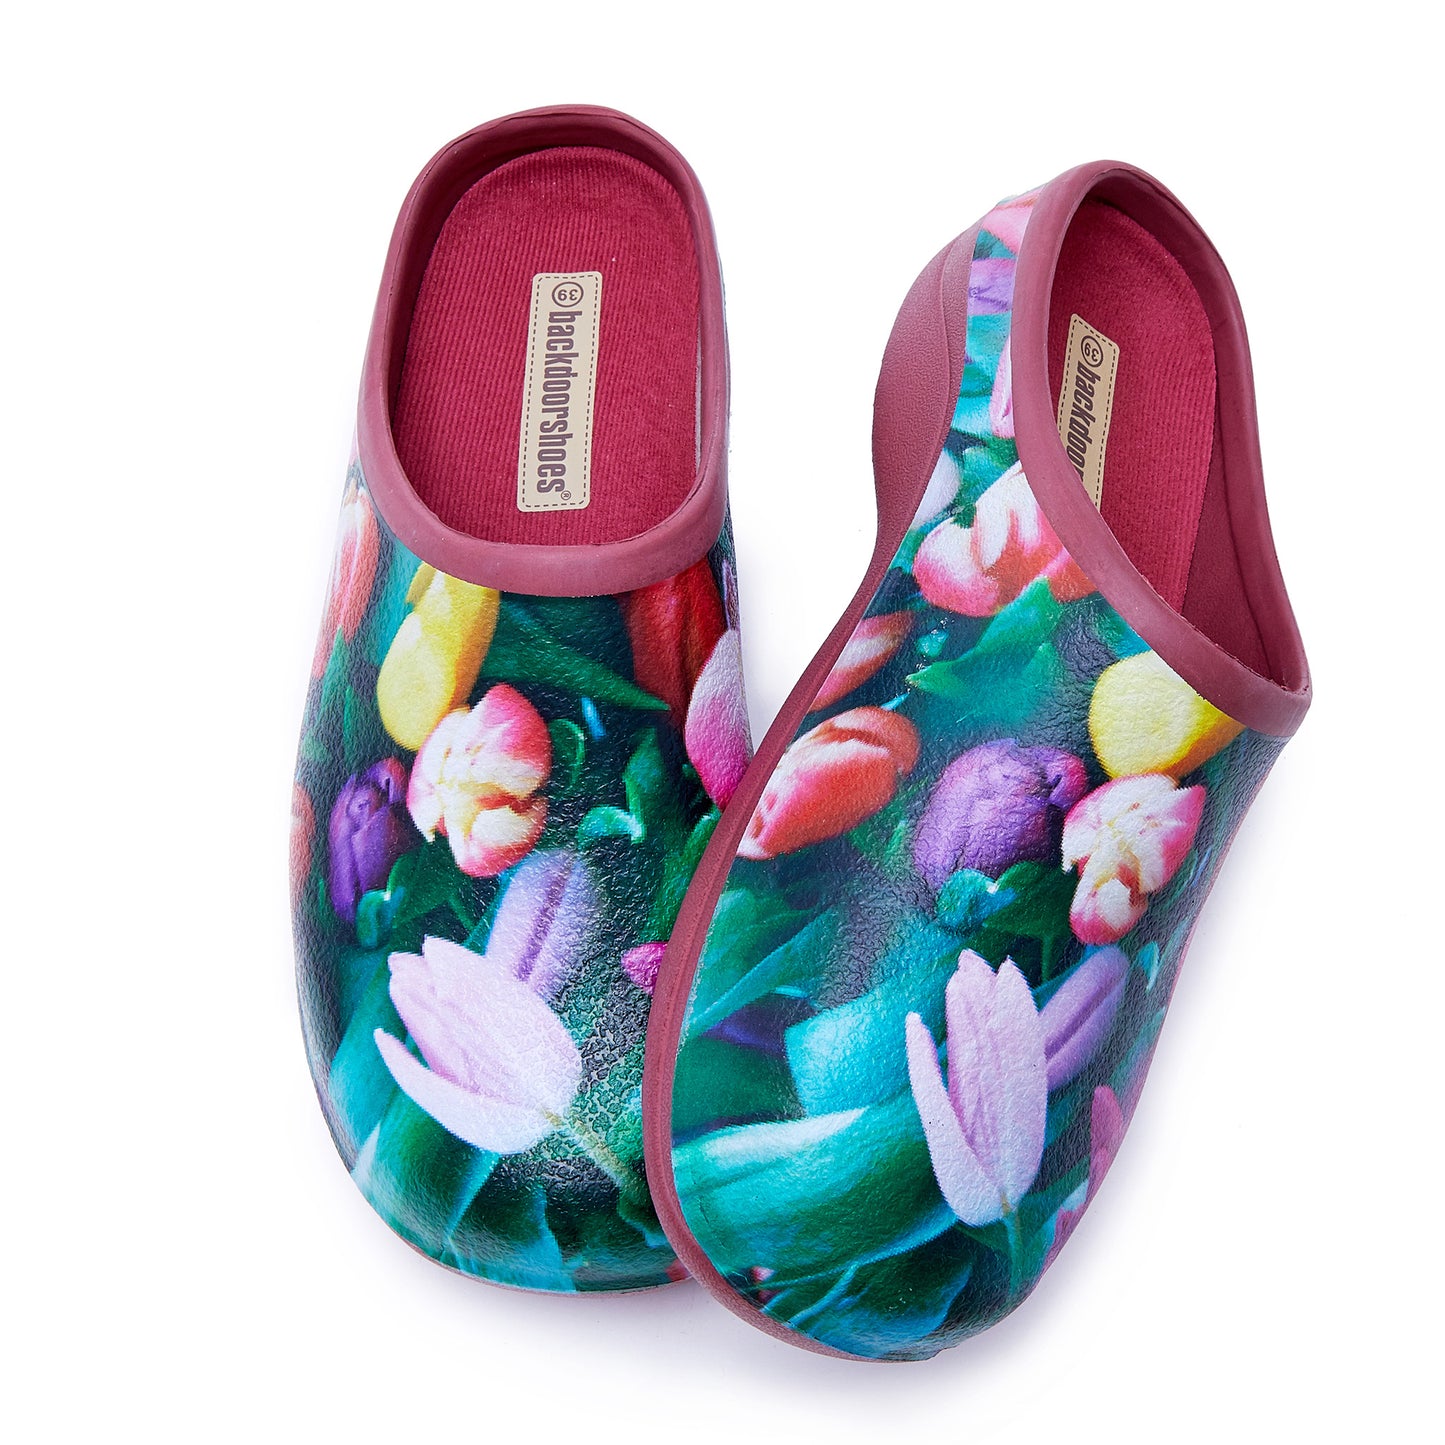 Tulip Red Sole Garden Clogs Backdoorshoes®